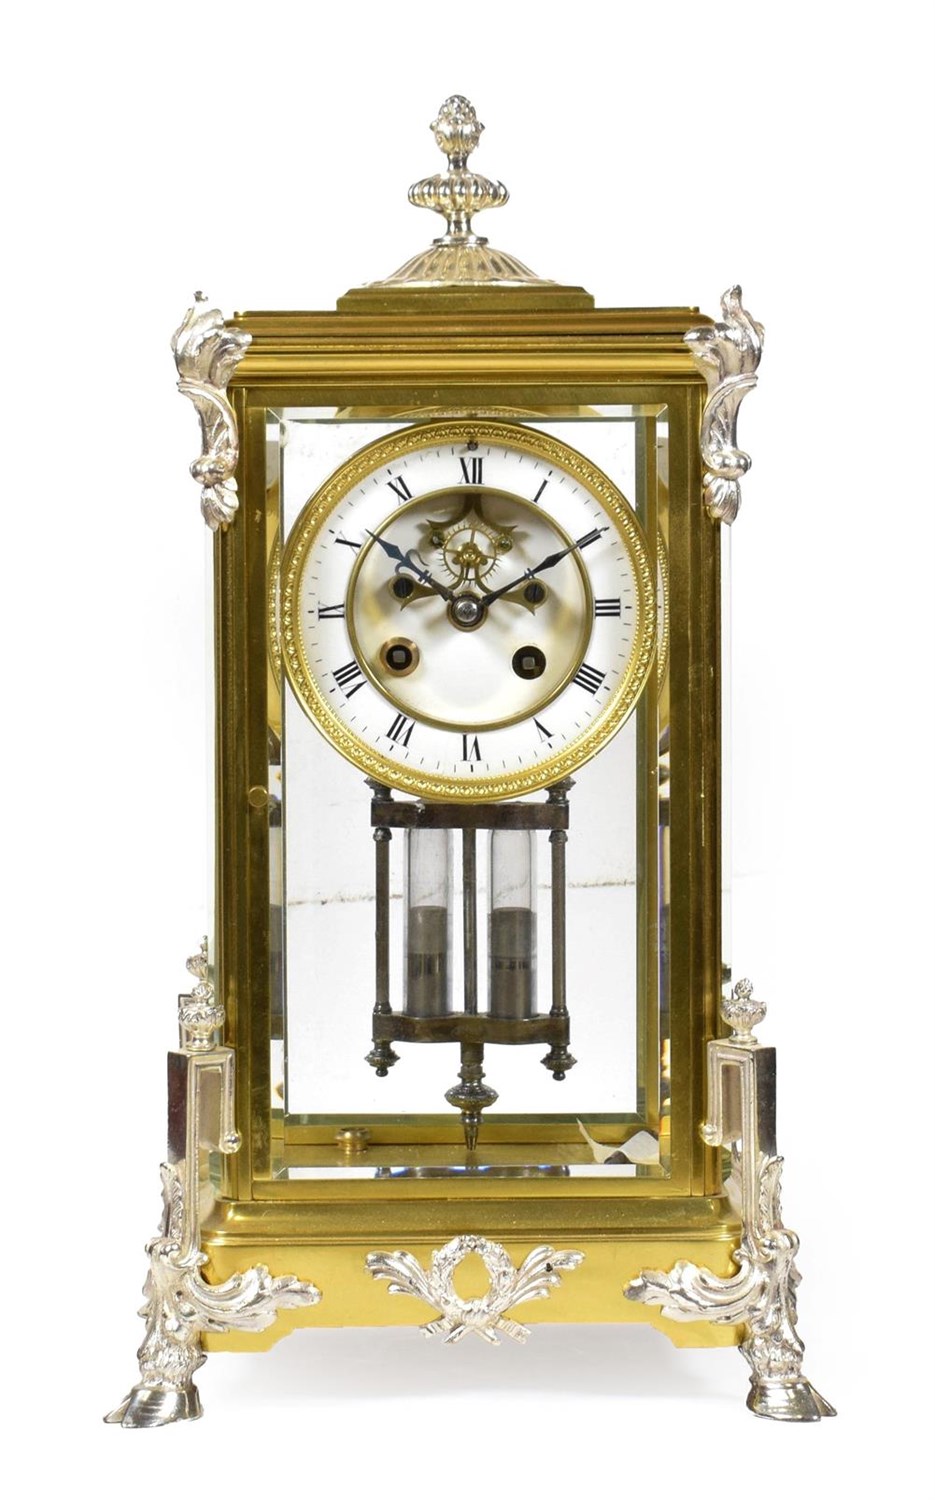 Lot 409 - <> A Brass Four Glass Striking Mantel Clock, circa 1900, brass case with silvered mounts, four...